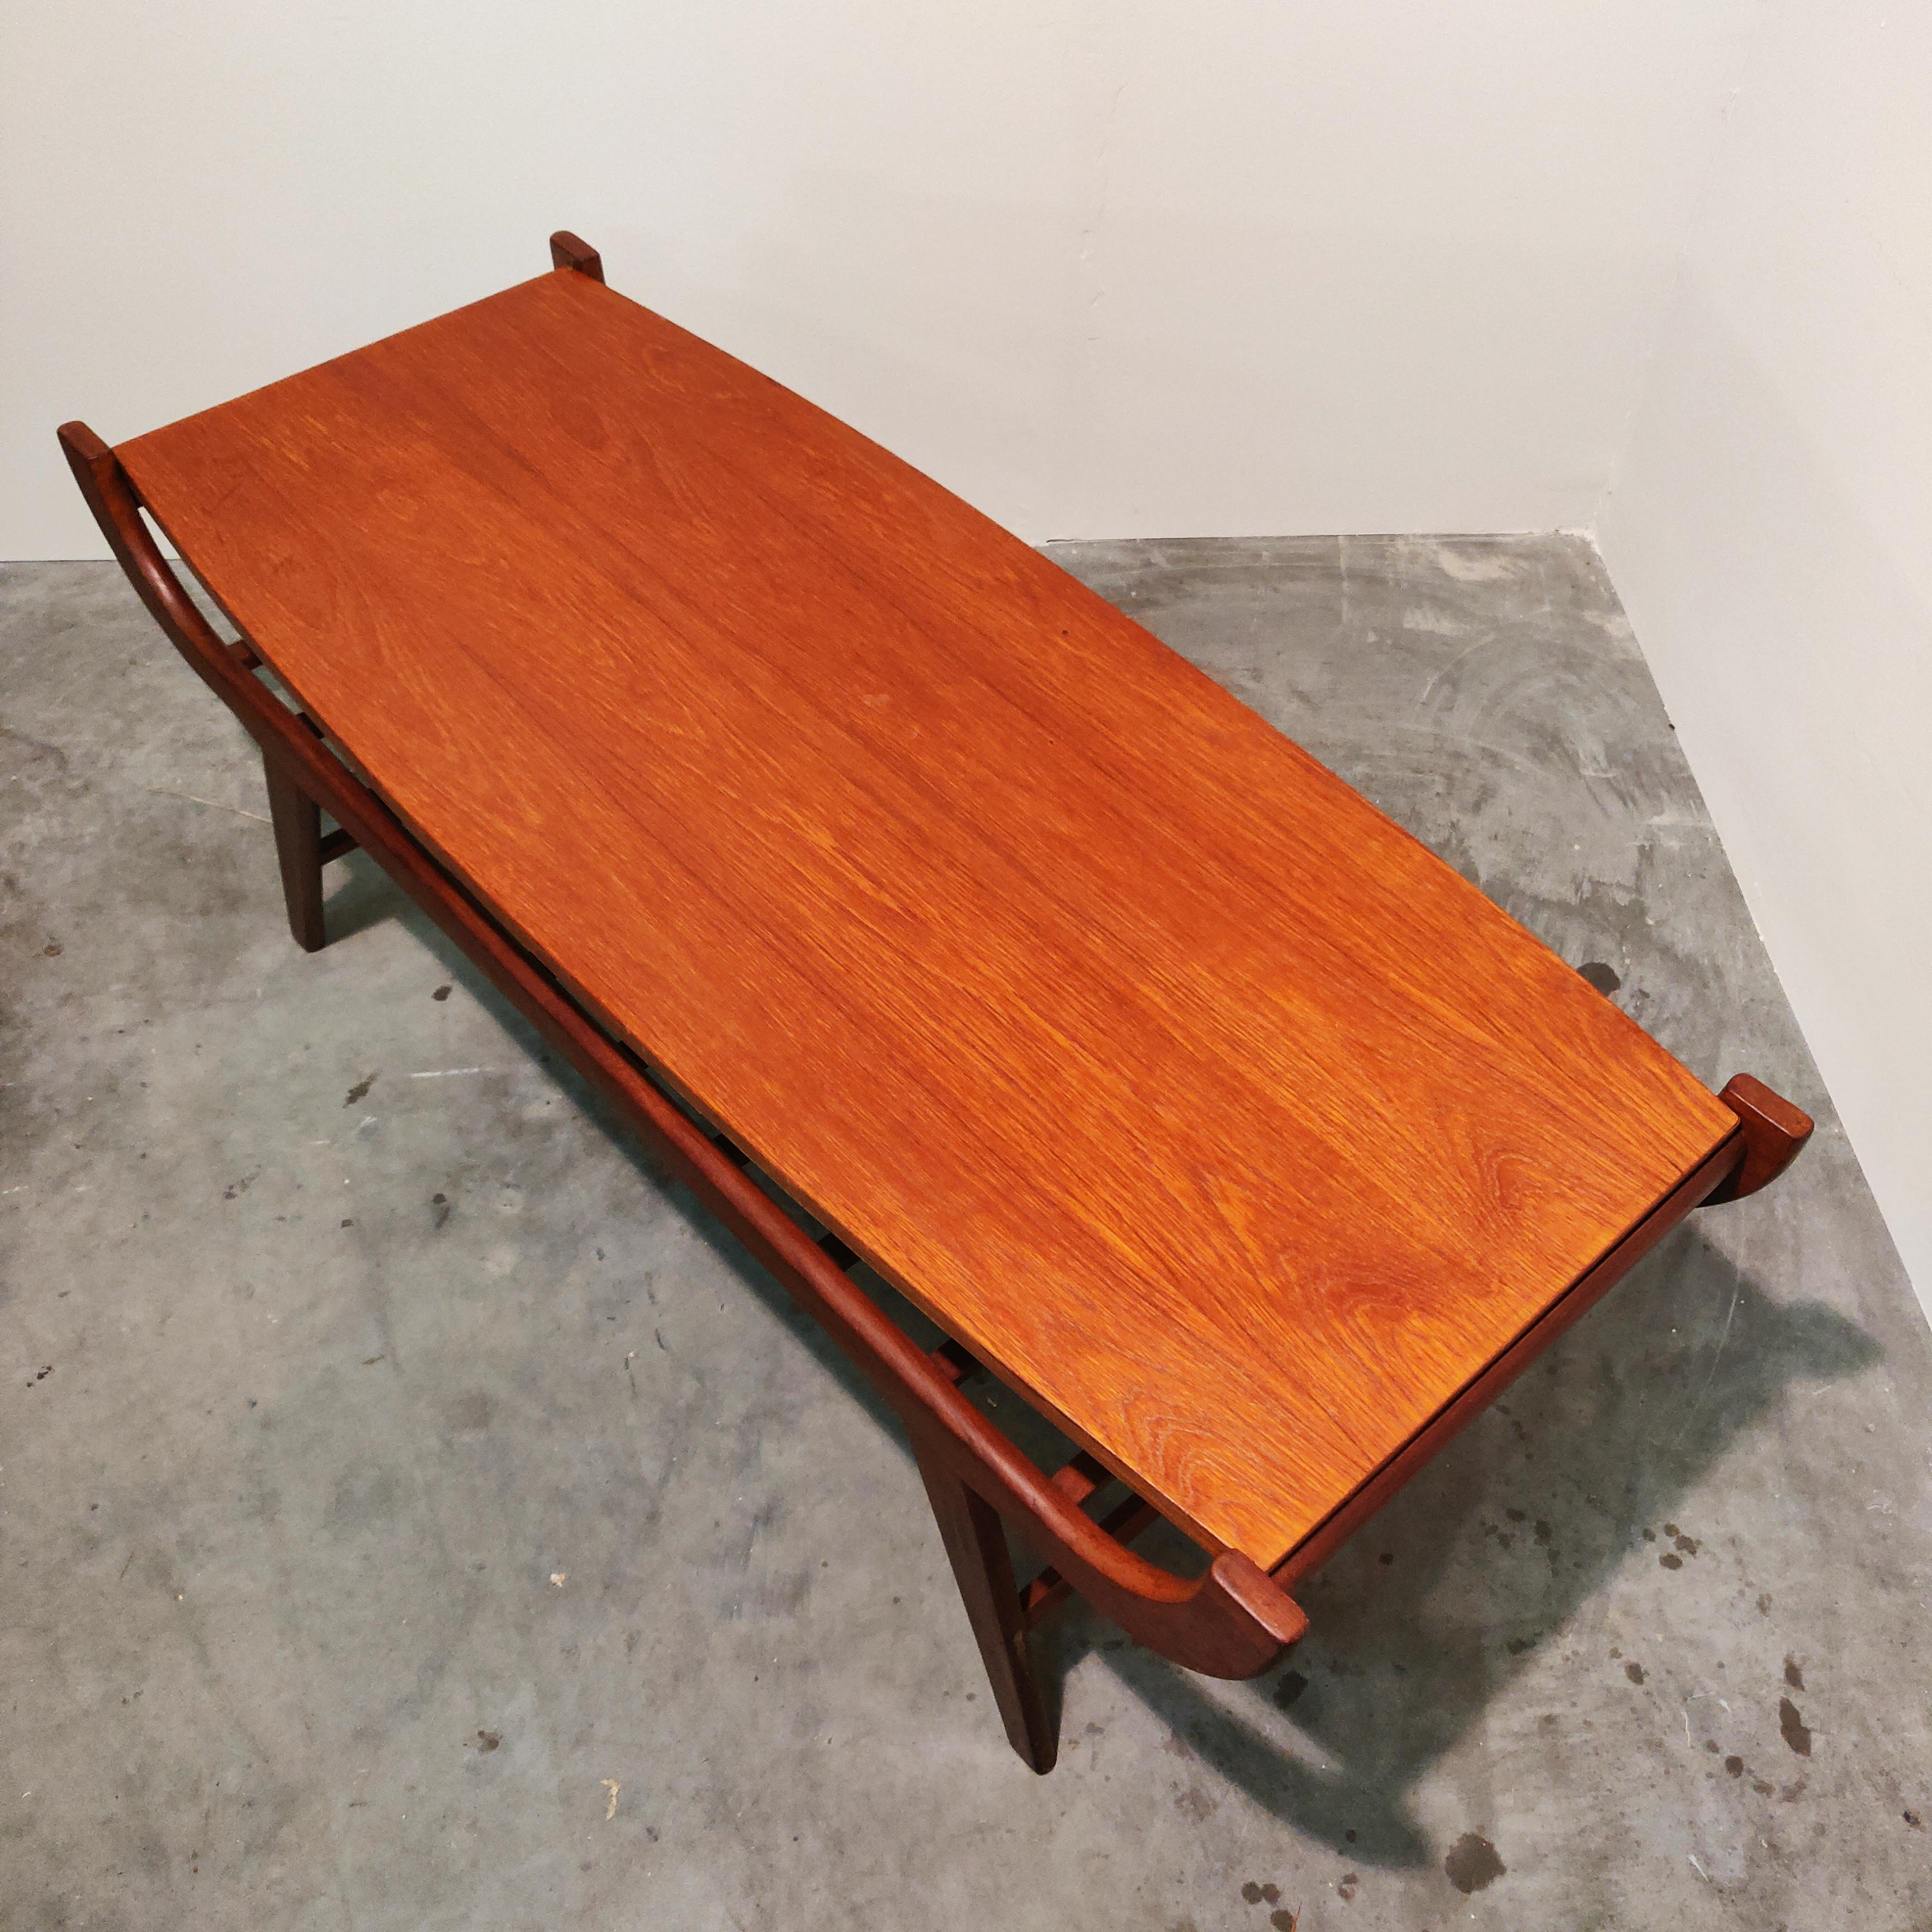 Teak Mid Century Modern Coffee Table with Turnable Top, 1960s For Sale